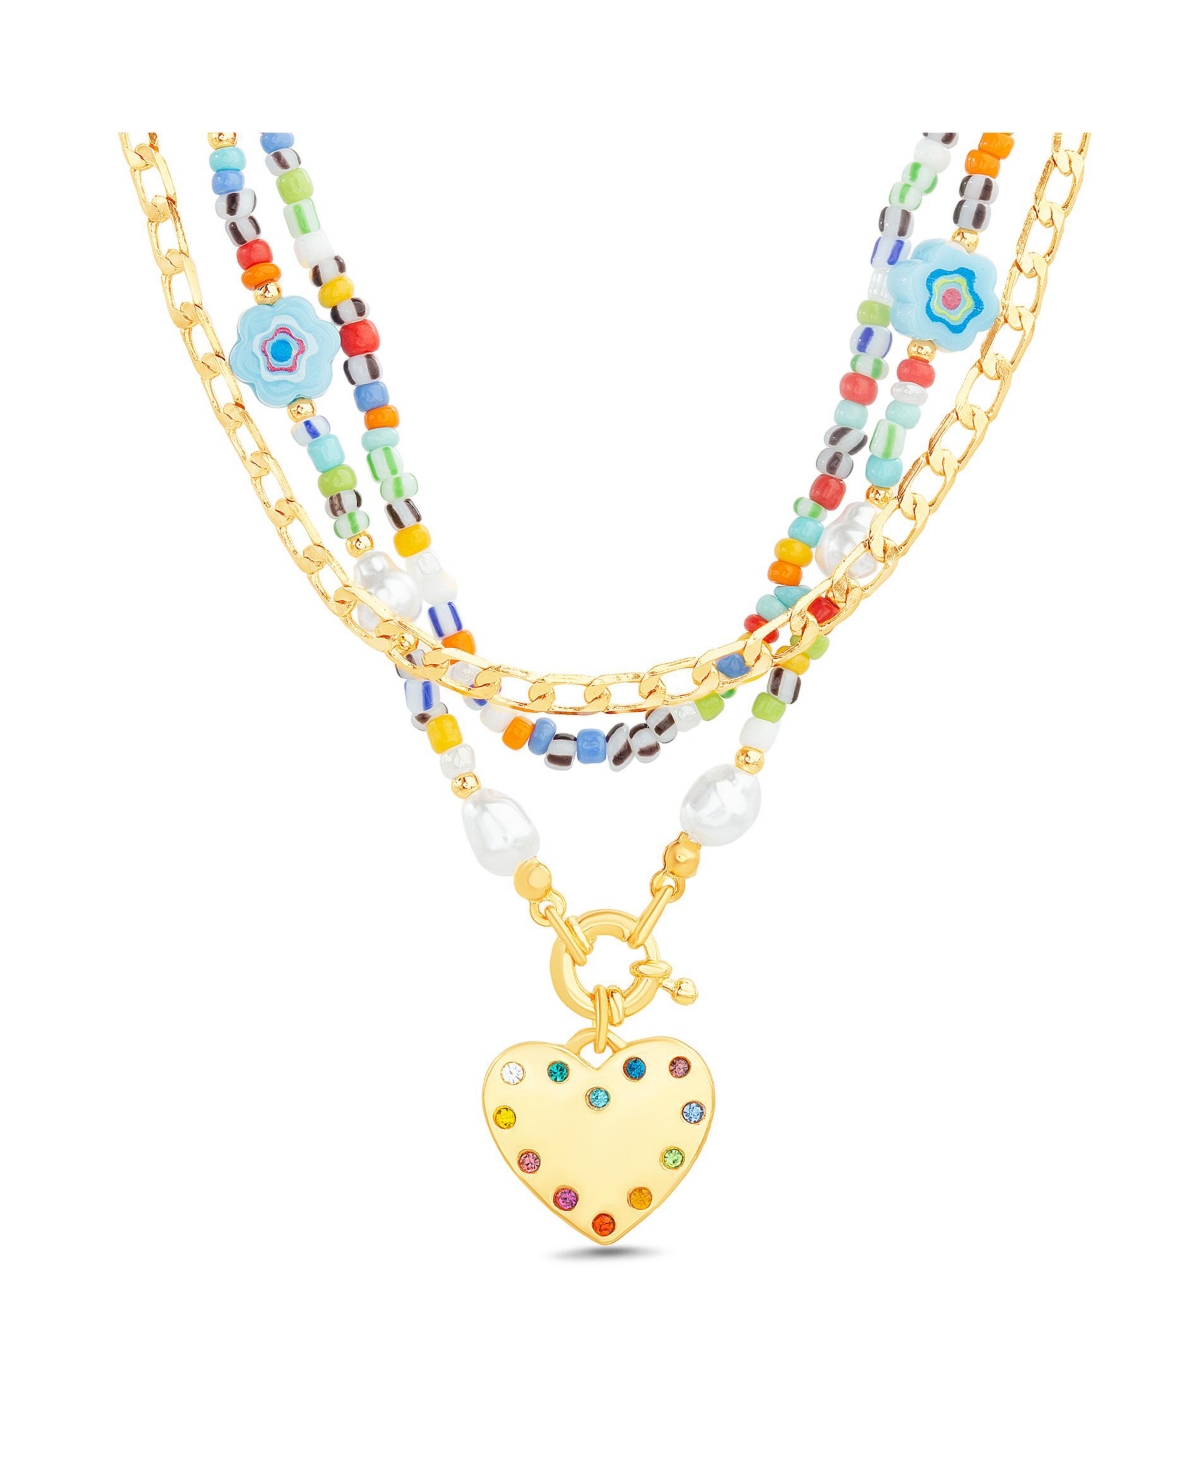 Multi 3 Piece Mixed Beaded and Chain Necklace Set with Heart Charm Pendant - Multi